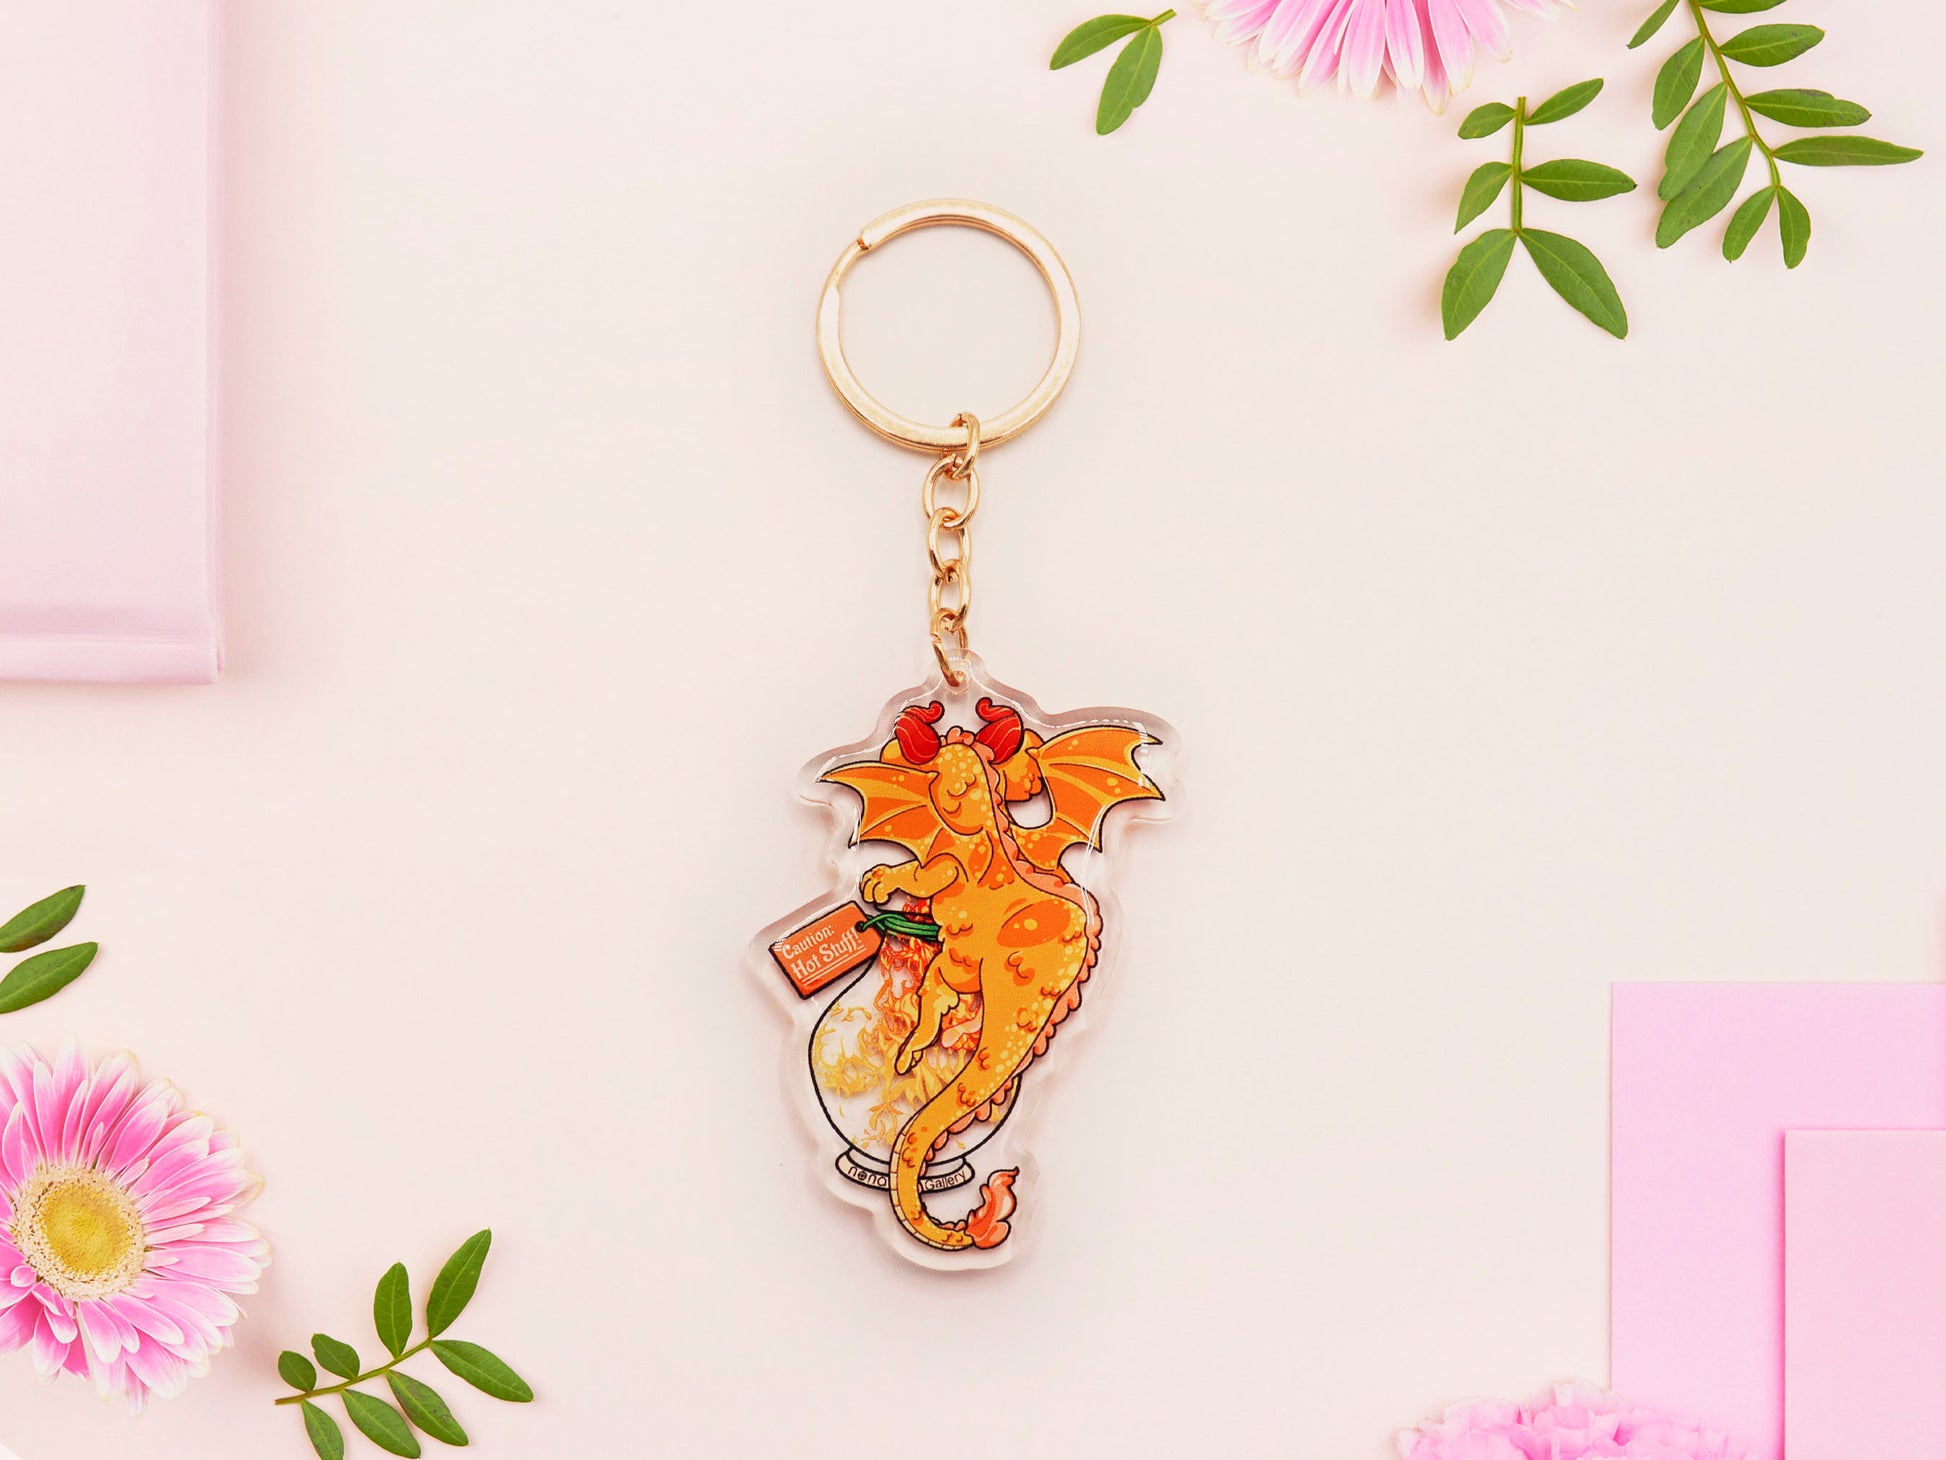 Clear acrylic keychain with gold clasp with a cartoon illustration of an orange baby dragon with a wings open hugging a potion bottle whilst breathing fire flames inside, labelled Dragon's Breath.